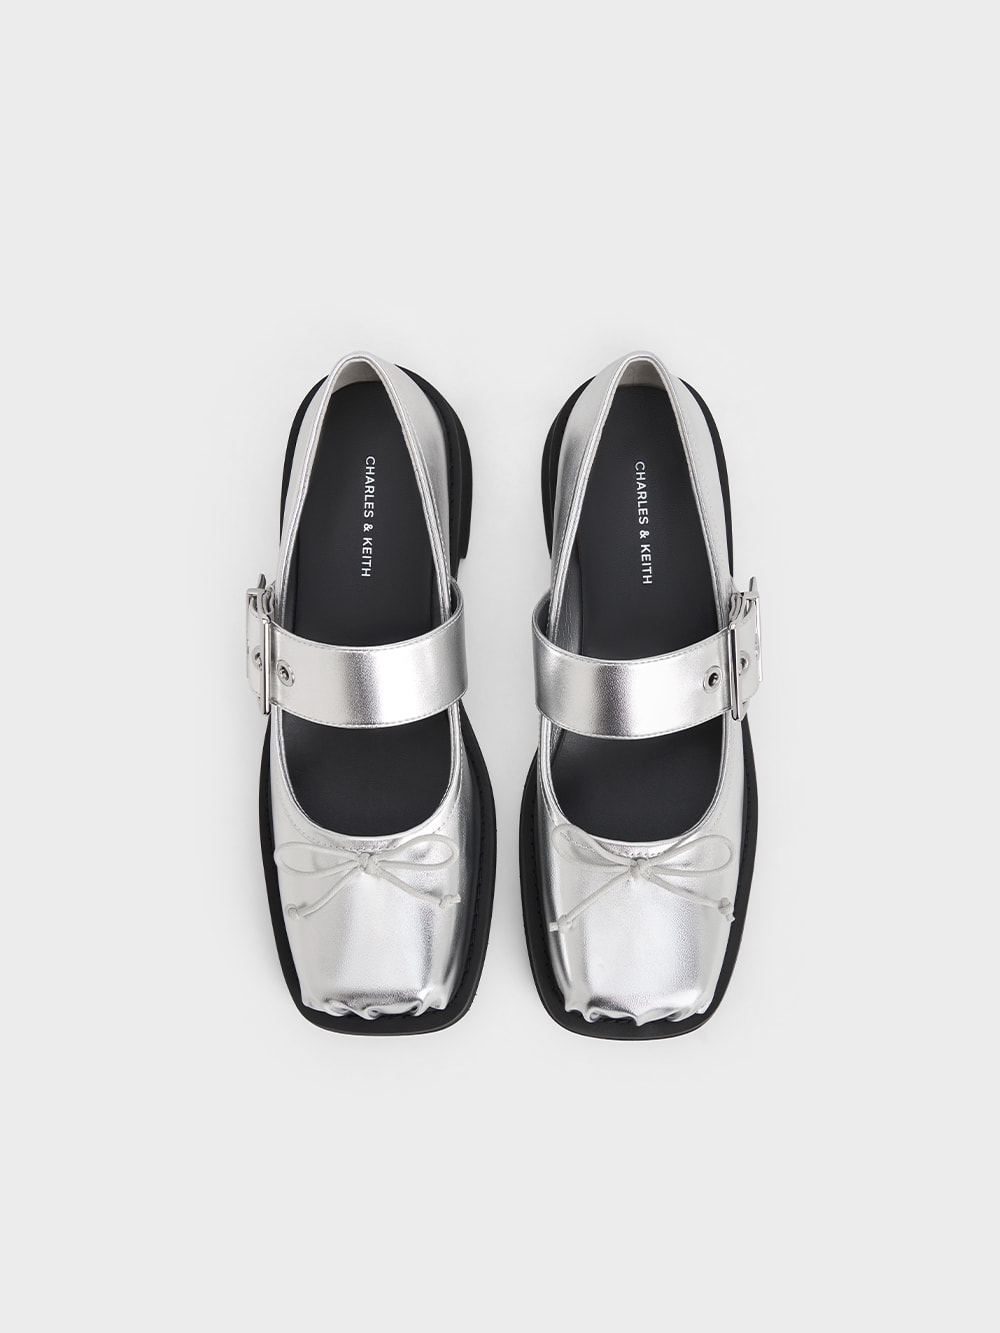 Metallic Silver Bow Buckled Mary Janes - CHARLES & KEITH